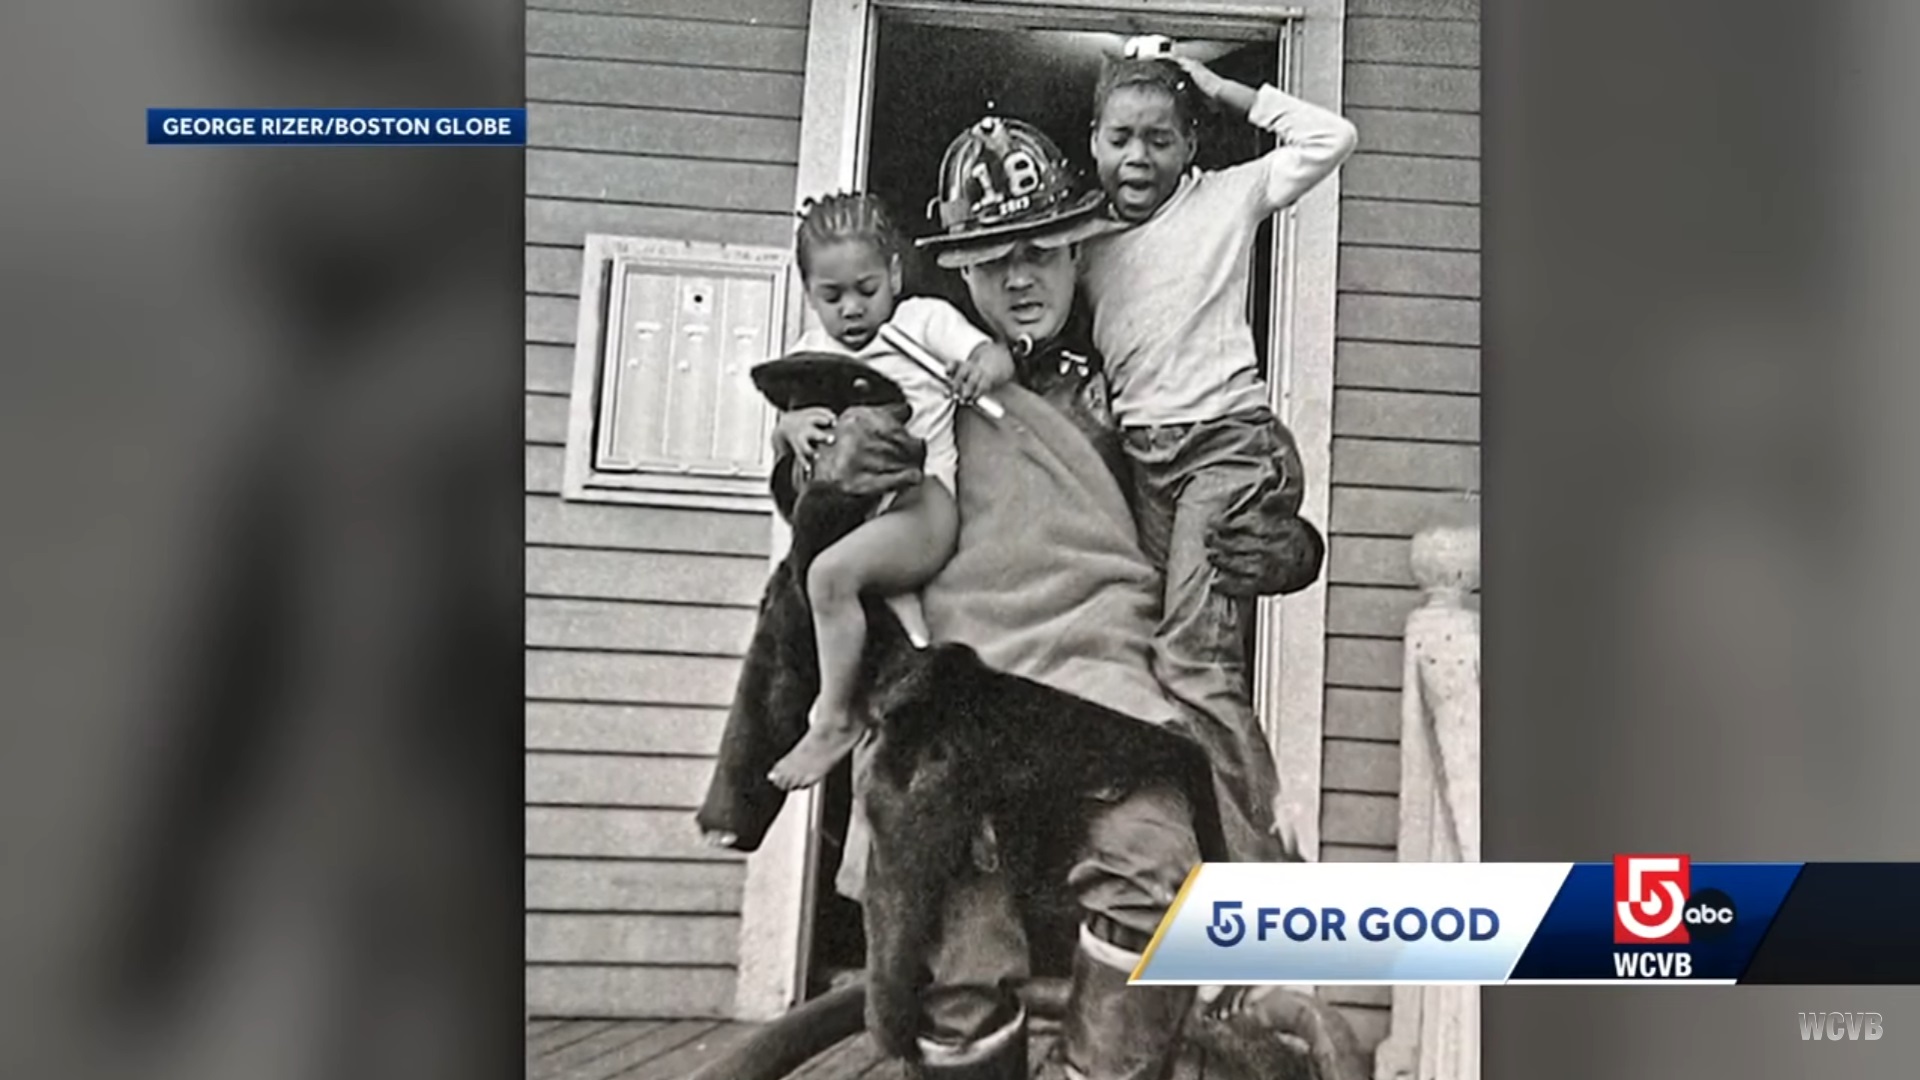 Boston firefighter reunites with children grabbed from burning home 45
years ago